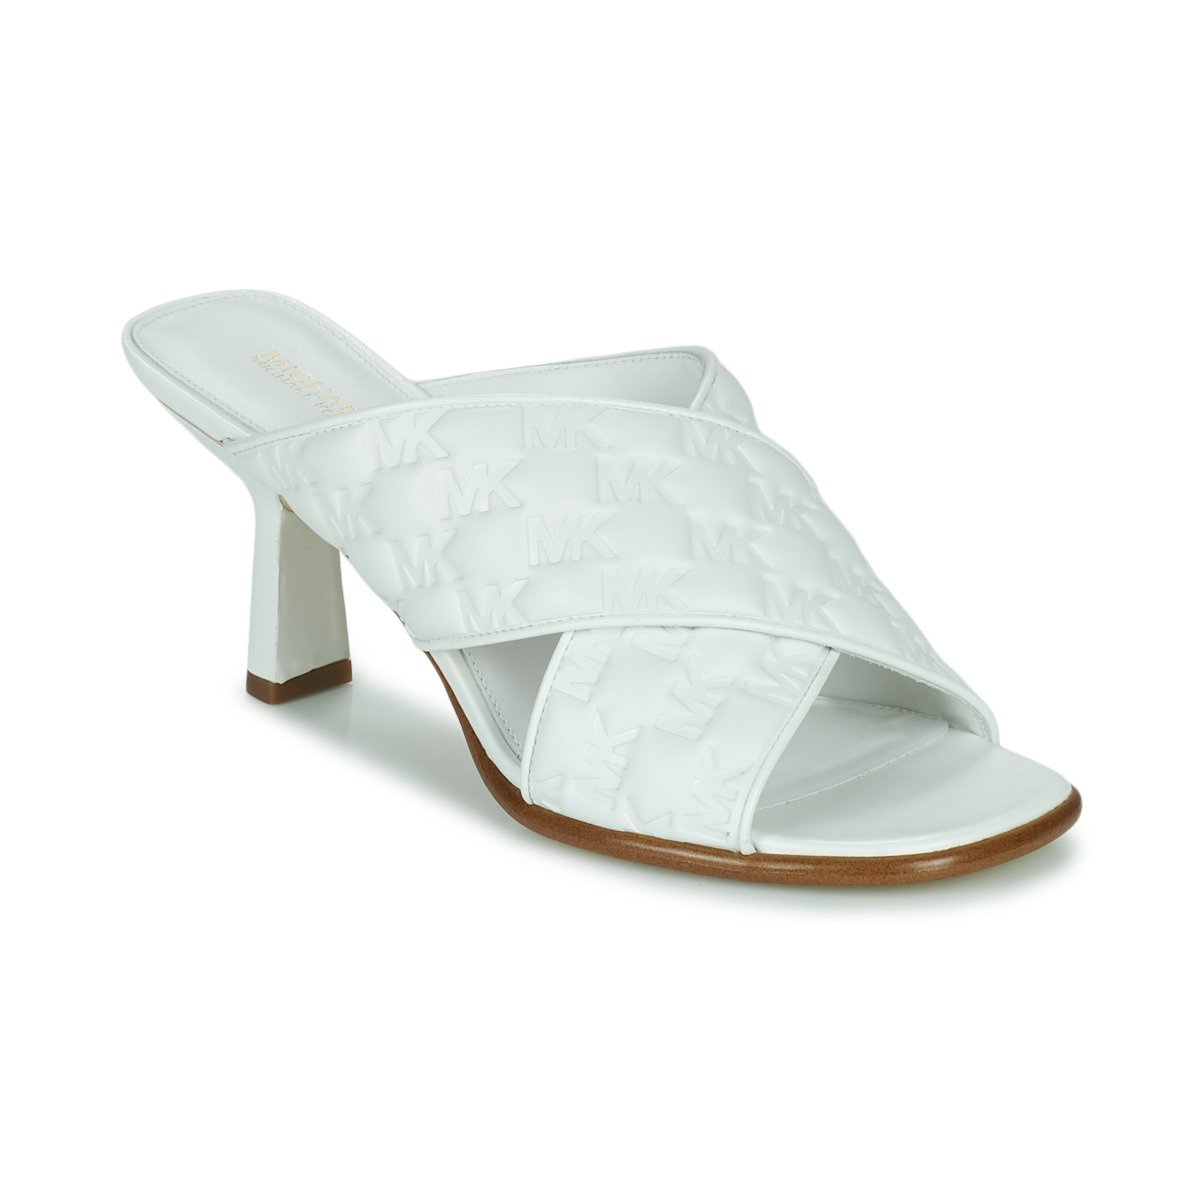 Chaussures Femme Tige : Synthétique GIDEON MULE Blanc